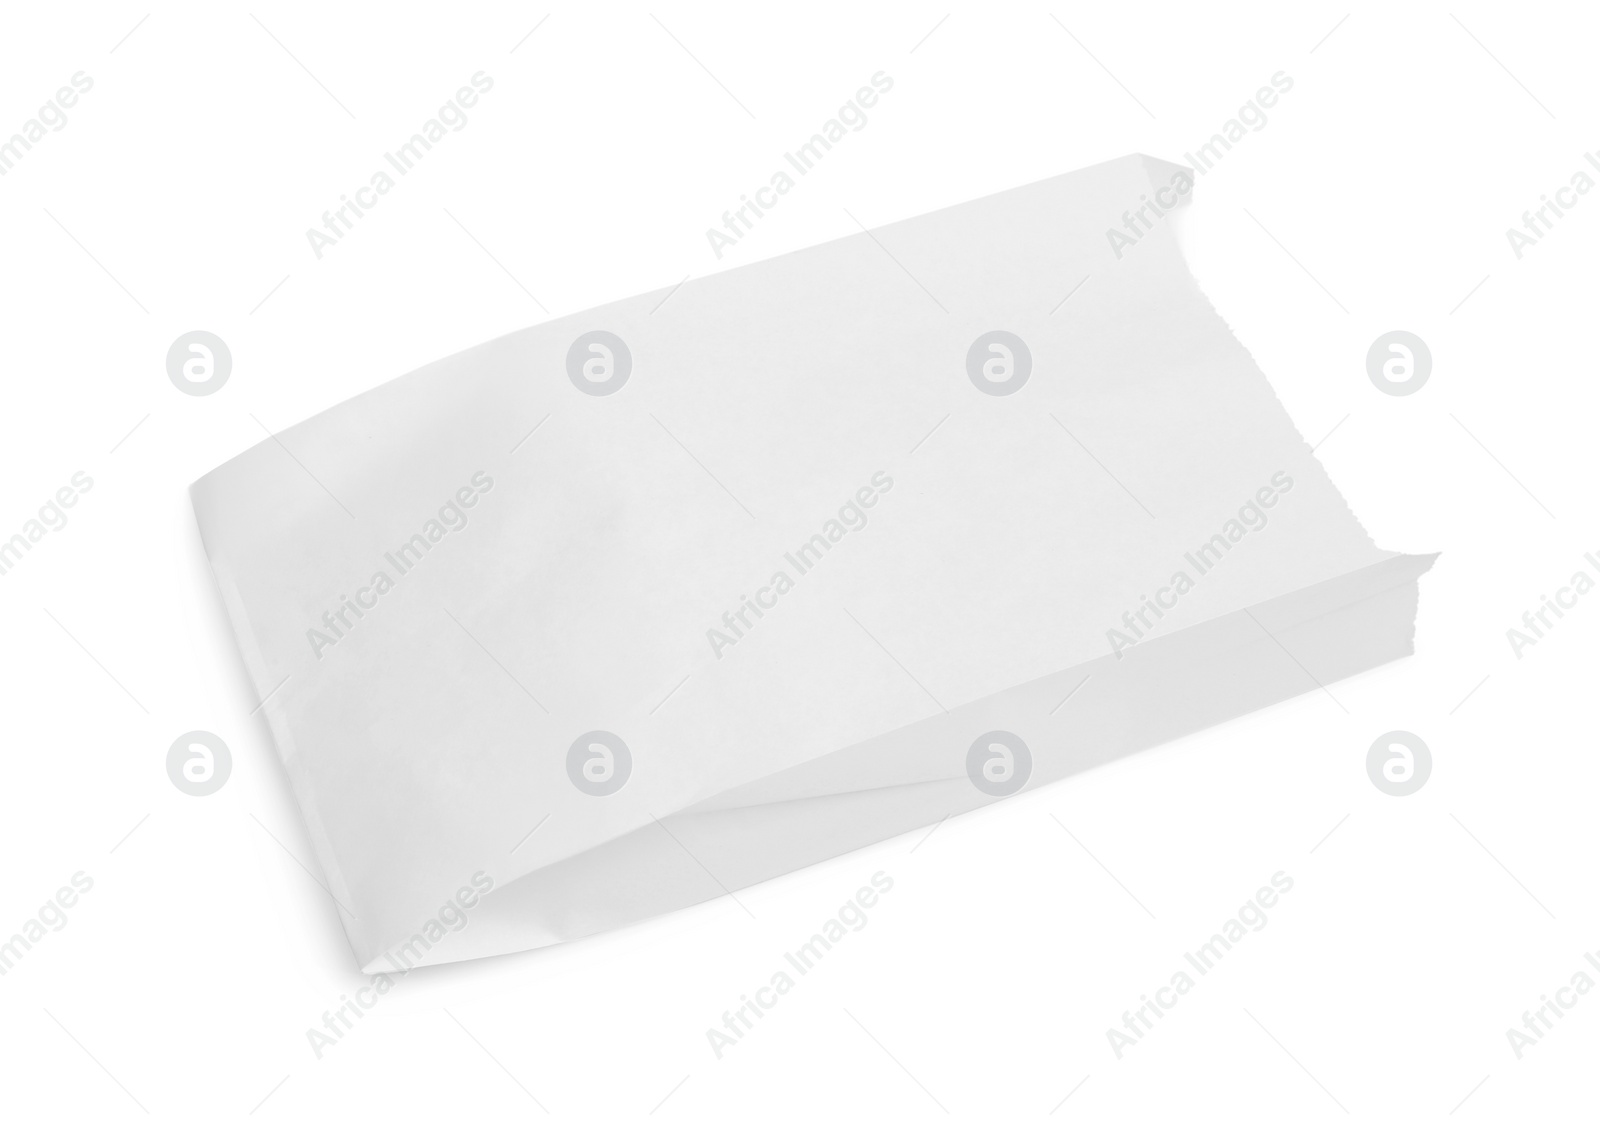 Photo of Blank paper bag isolated on white. Mockup for design